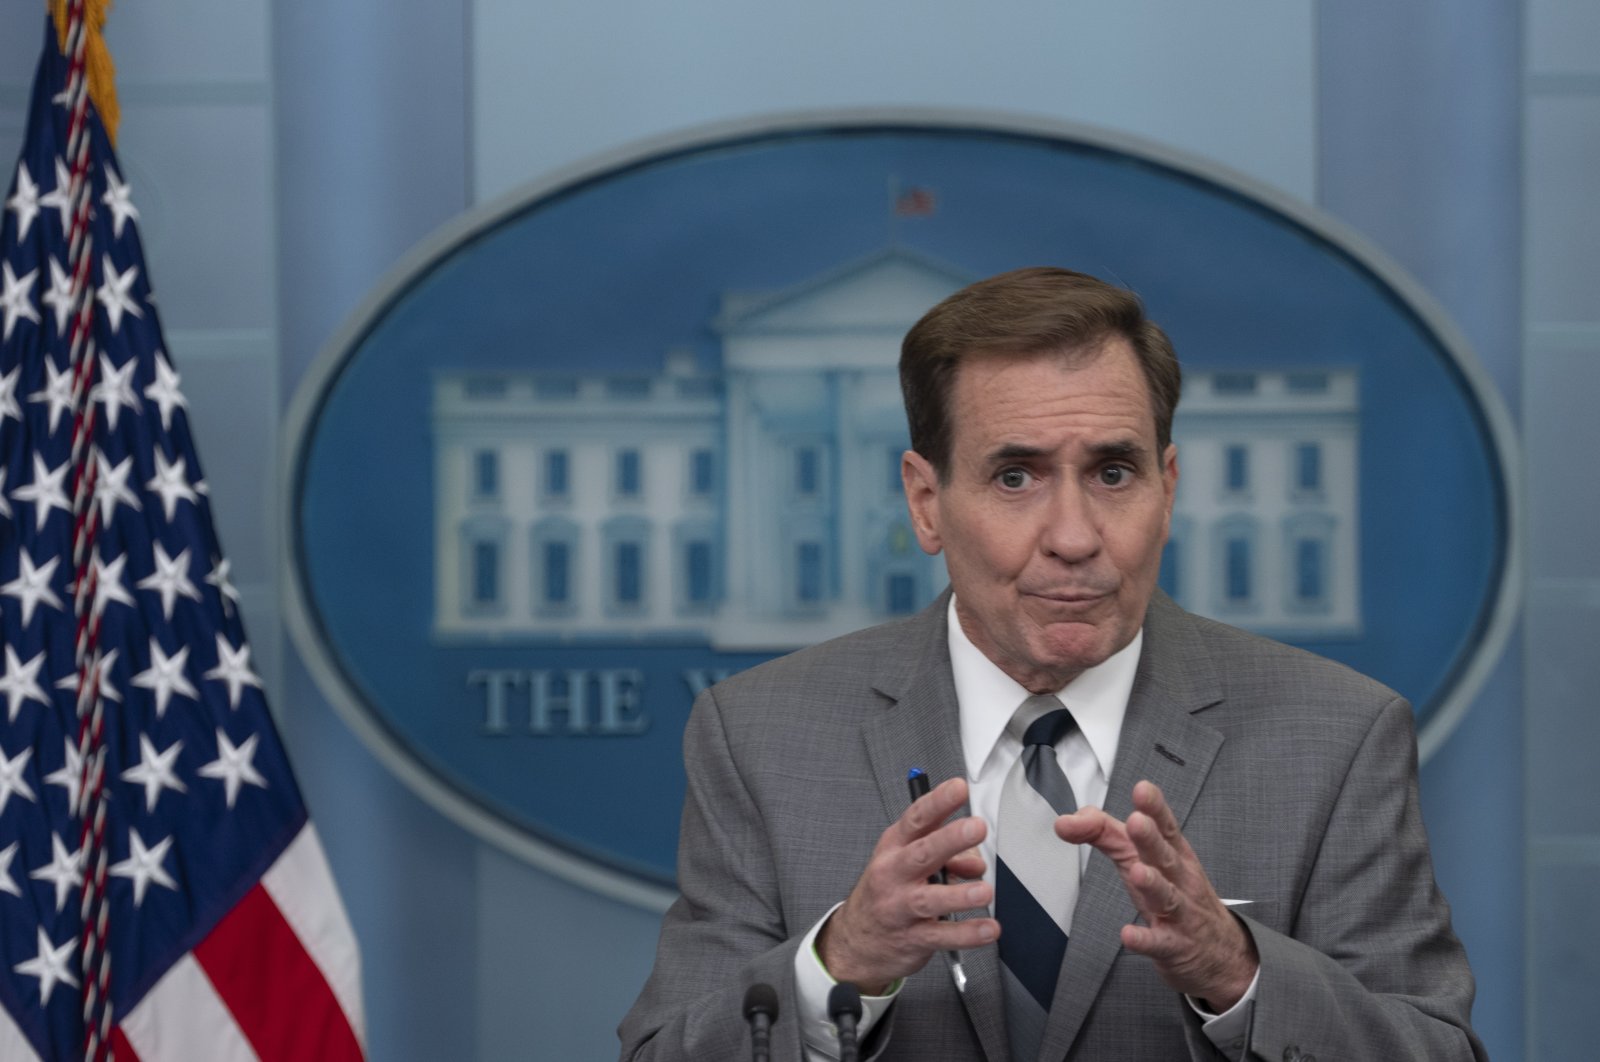 U.S. National Security Council coordinator for strategic communications, John Kirby, participates in a news briefing at the White House in Washington, D.C., U.S., on Oct. 26, 2022. (EPA Photo)